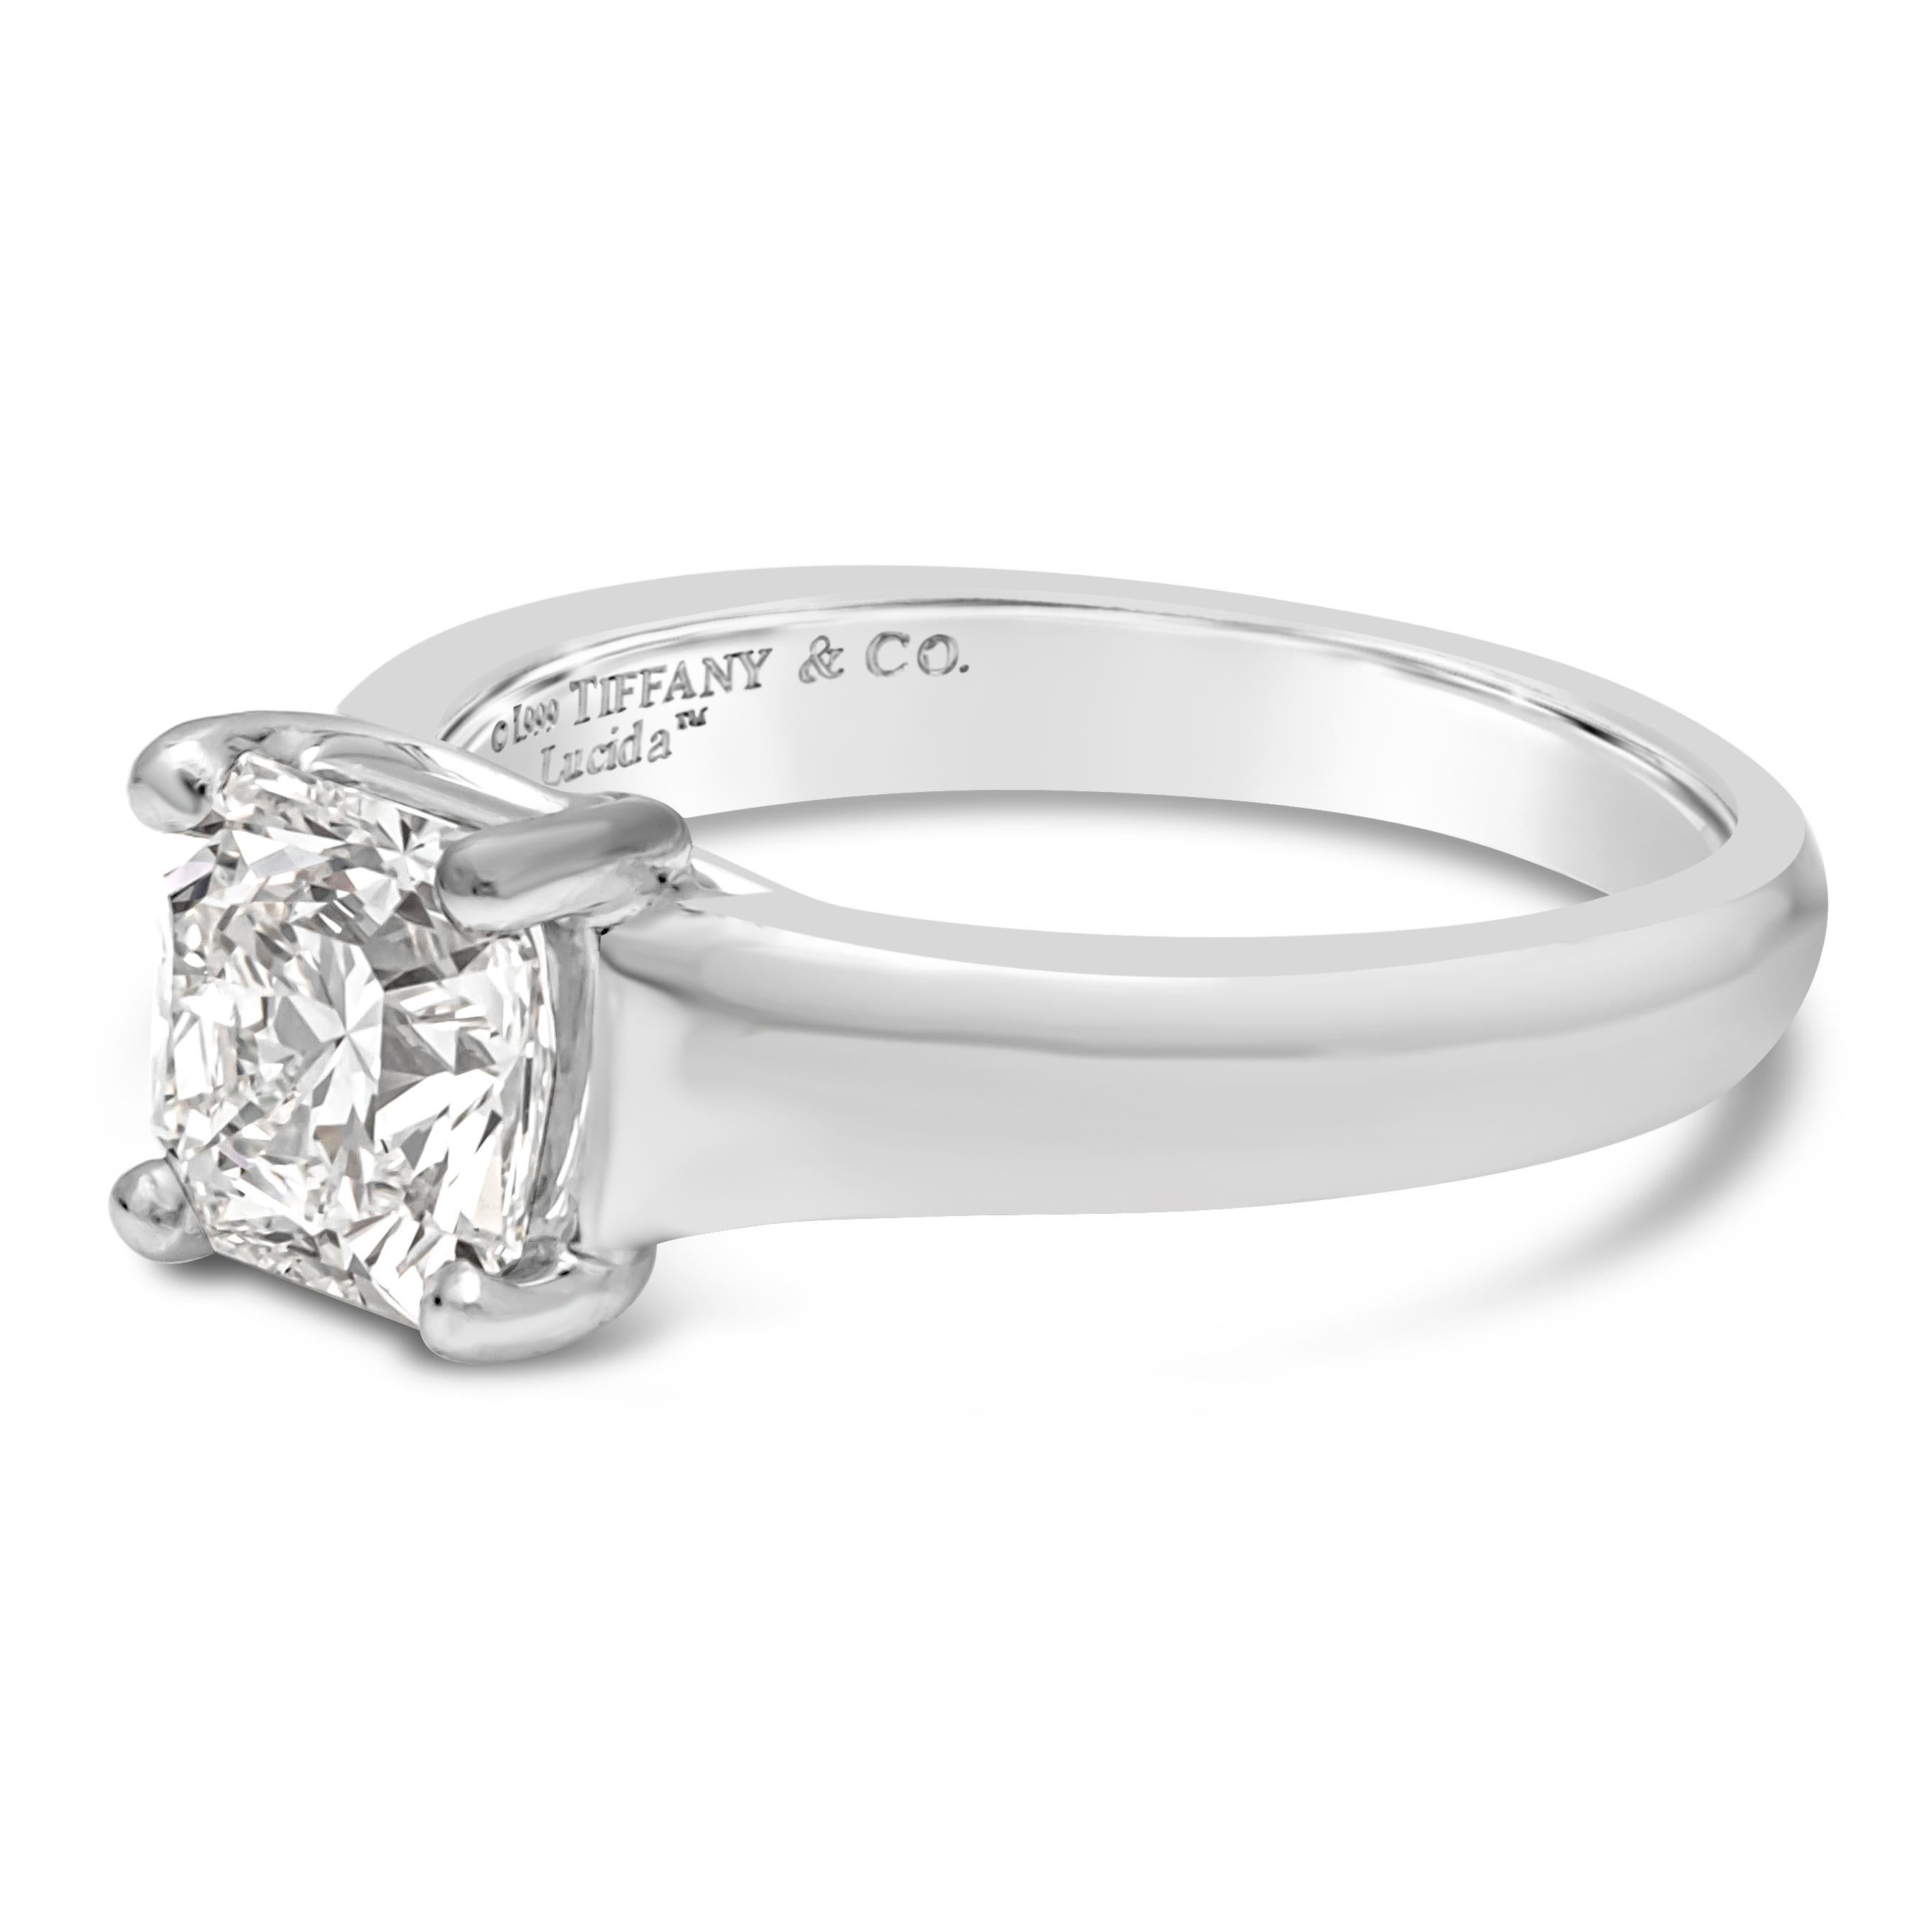 A timeless Tiffany & Co. solitaire engagement ring, showcasing a 1.08 carats radiant cut diamond certified by GIA as F color and VVS2 clarity, set on a classic four prong basket setting finely made of platinum. Size 3.75 US, resizable upon request.